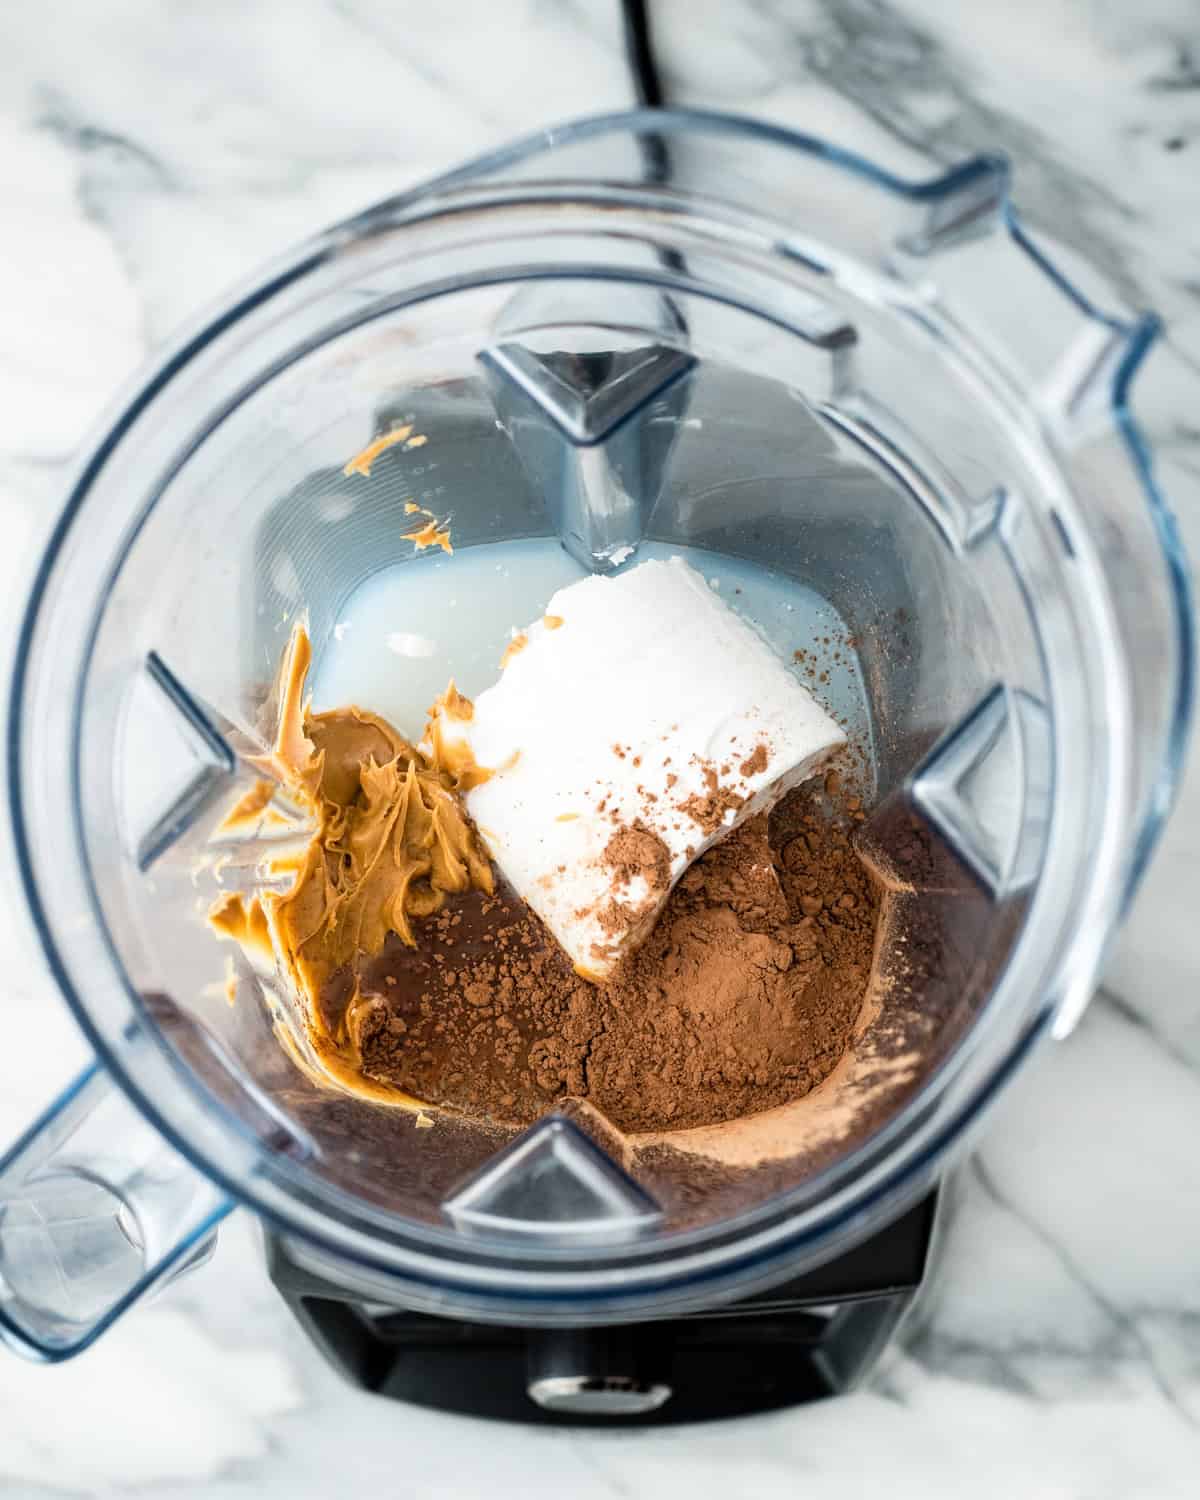 making Dairy Free Chocolate Peanut Butter Ice Cream in a blender container - ingredients added before blending